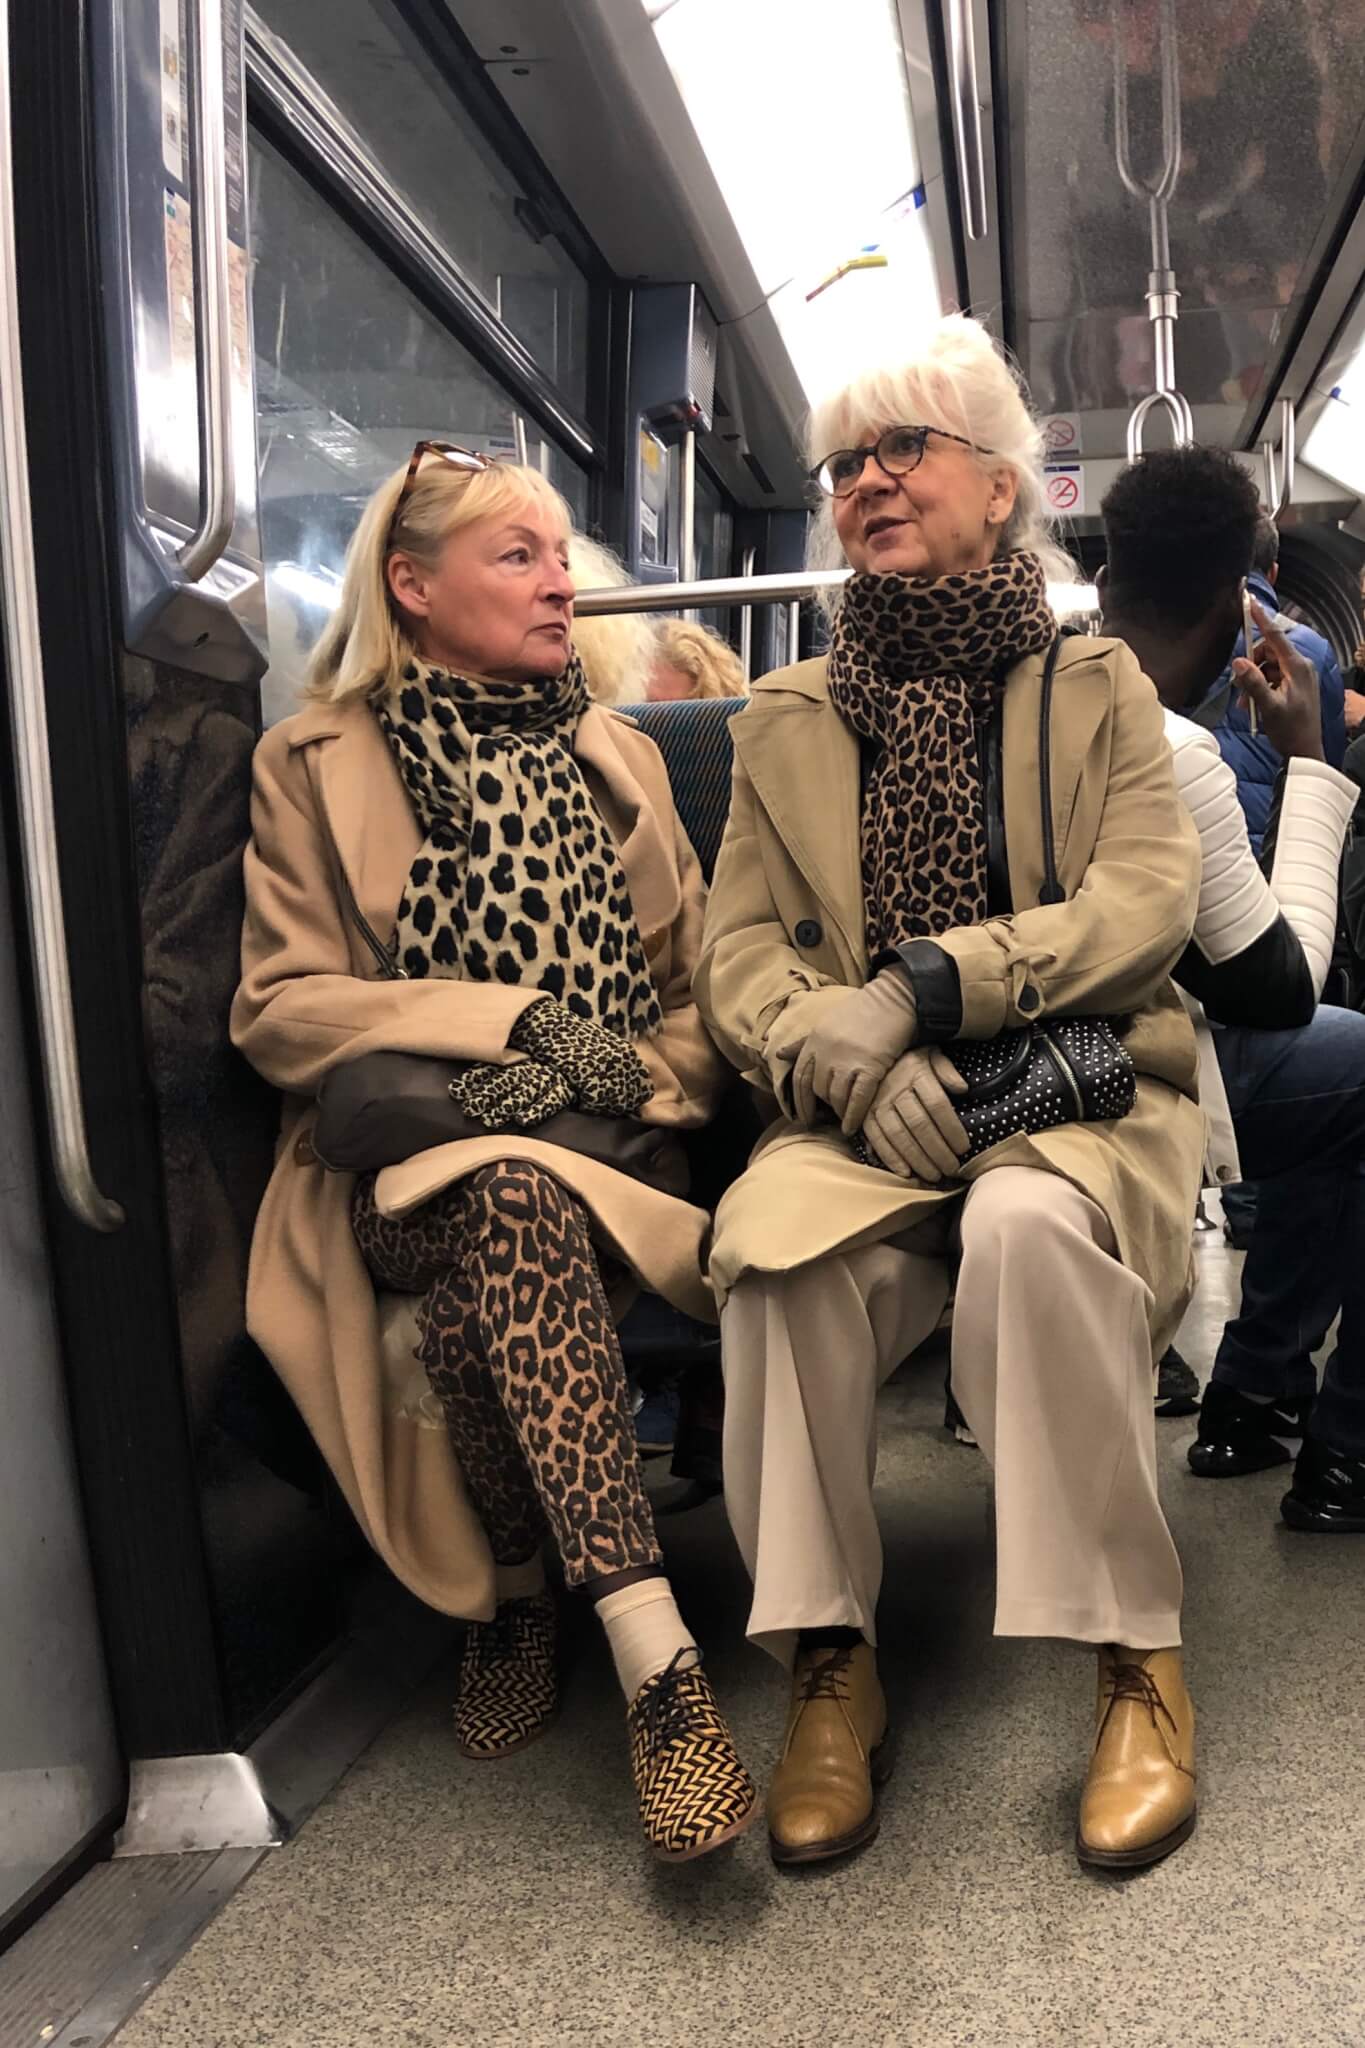 Caught this “we are best-friends-forever and let’s dress to kill” matching outfit ladies. C’est parafit! 